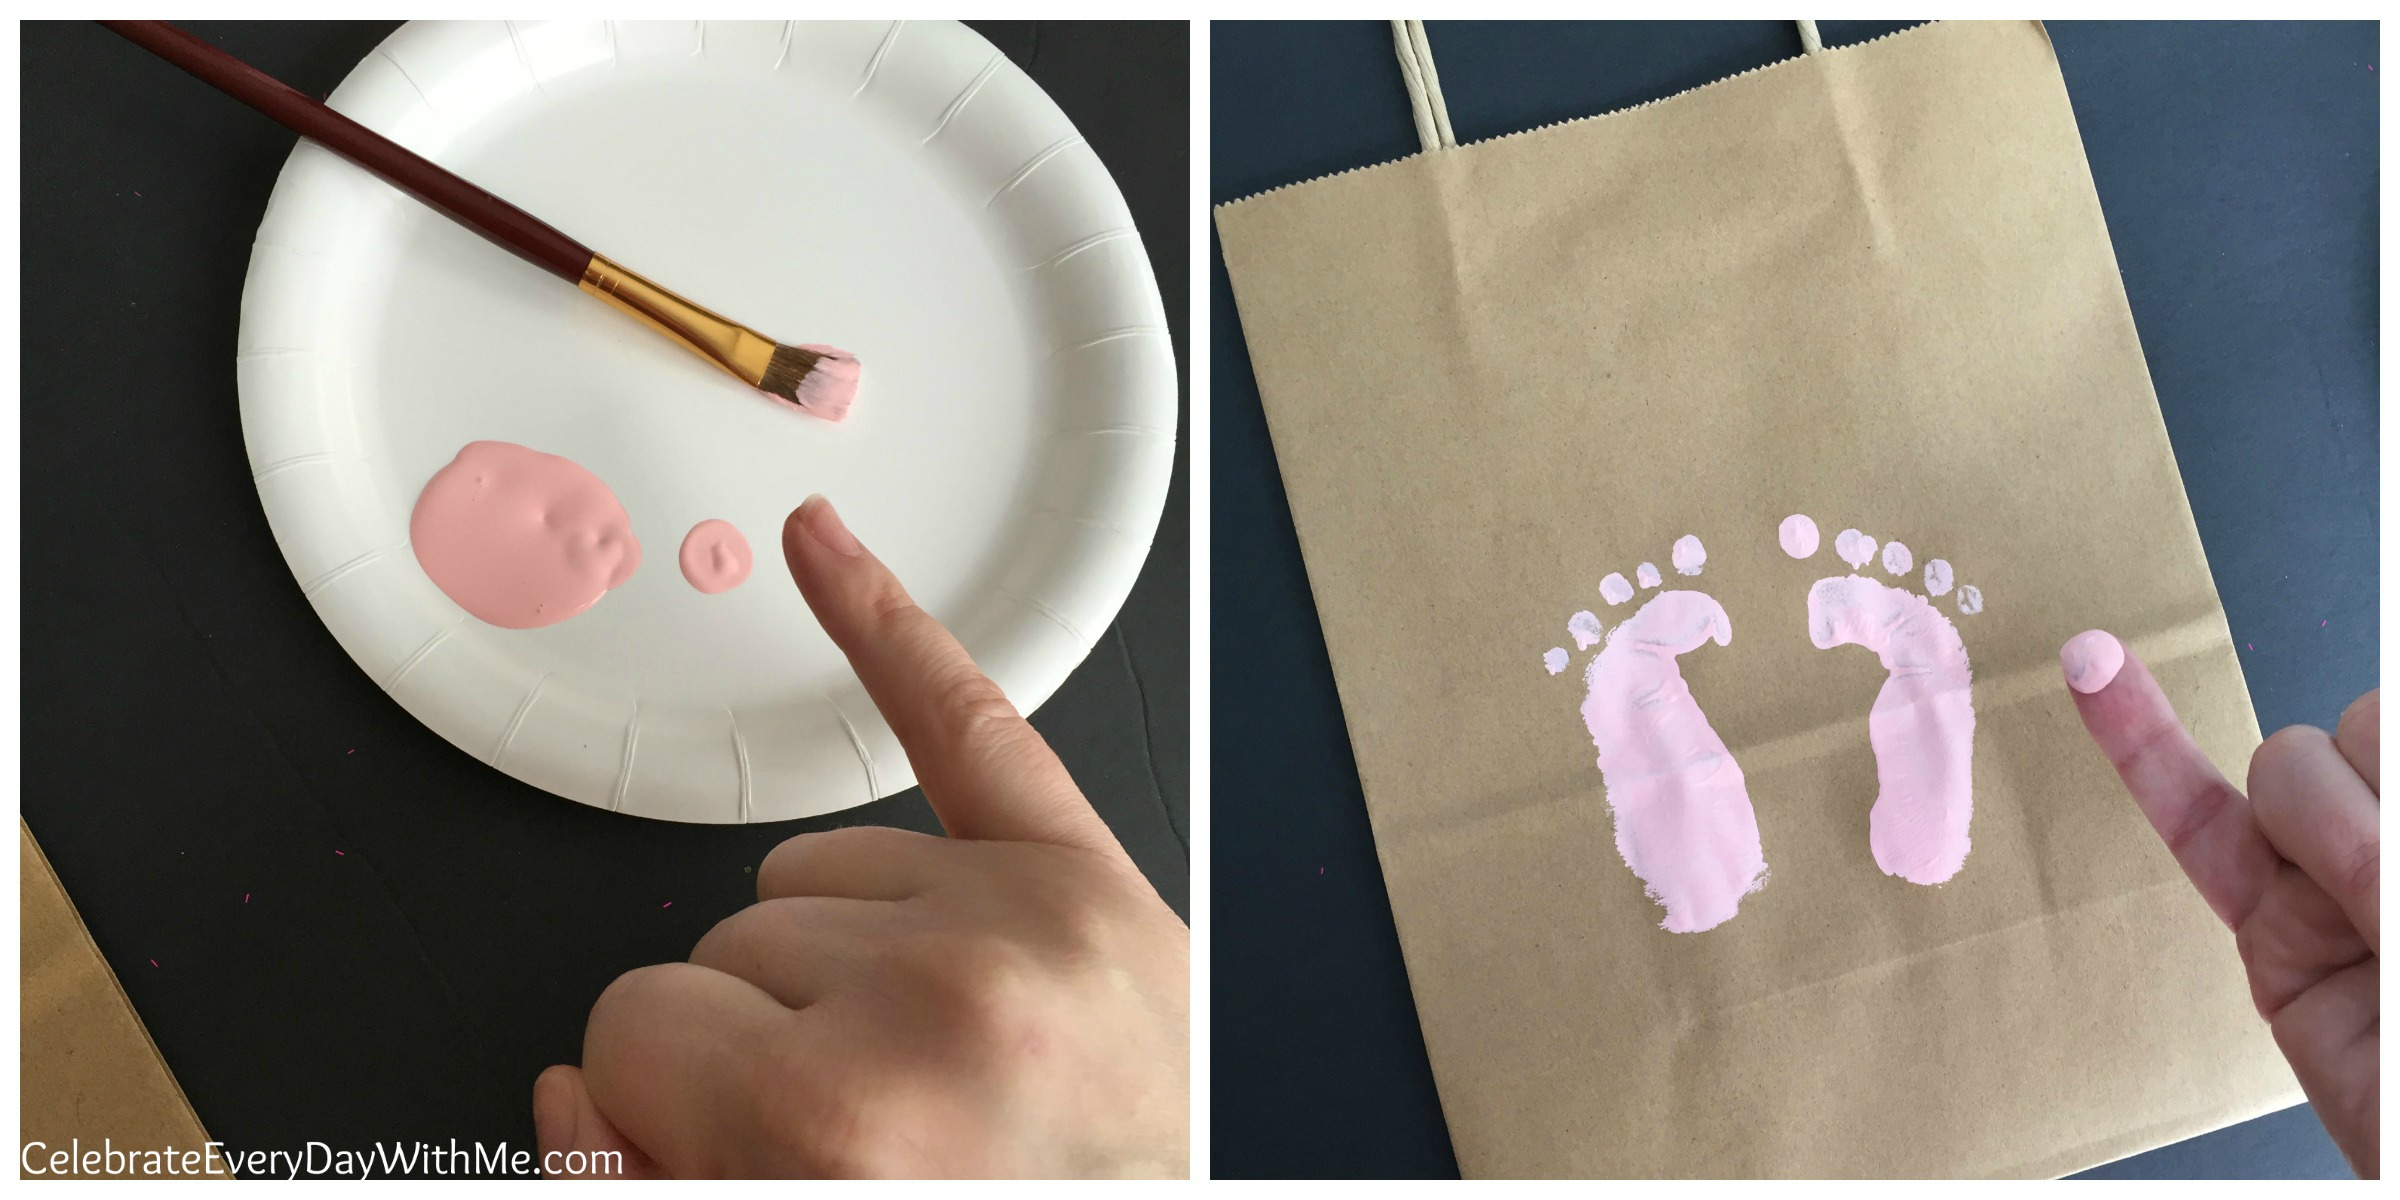 how-to-make-baby-footprints-with-your-hand-celebrate-every-day-with-me